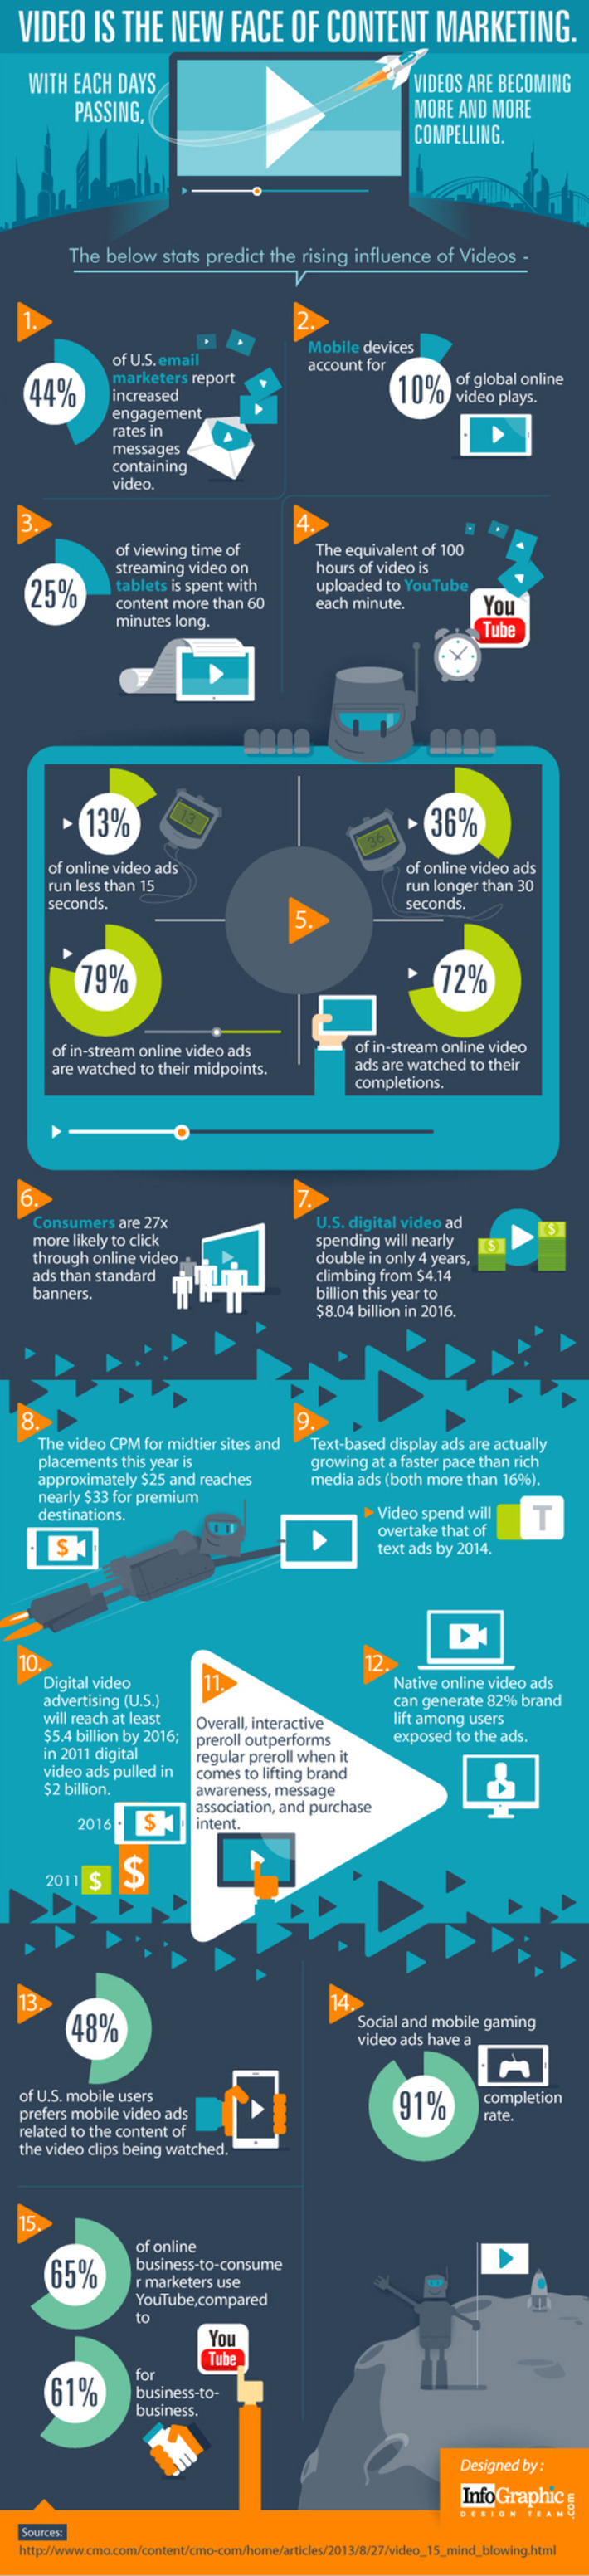 Video Is the New Face of Content Marketing [Infographic] | A Marketing Mix | Scoop.it